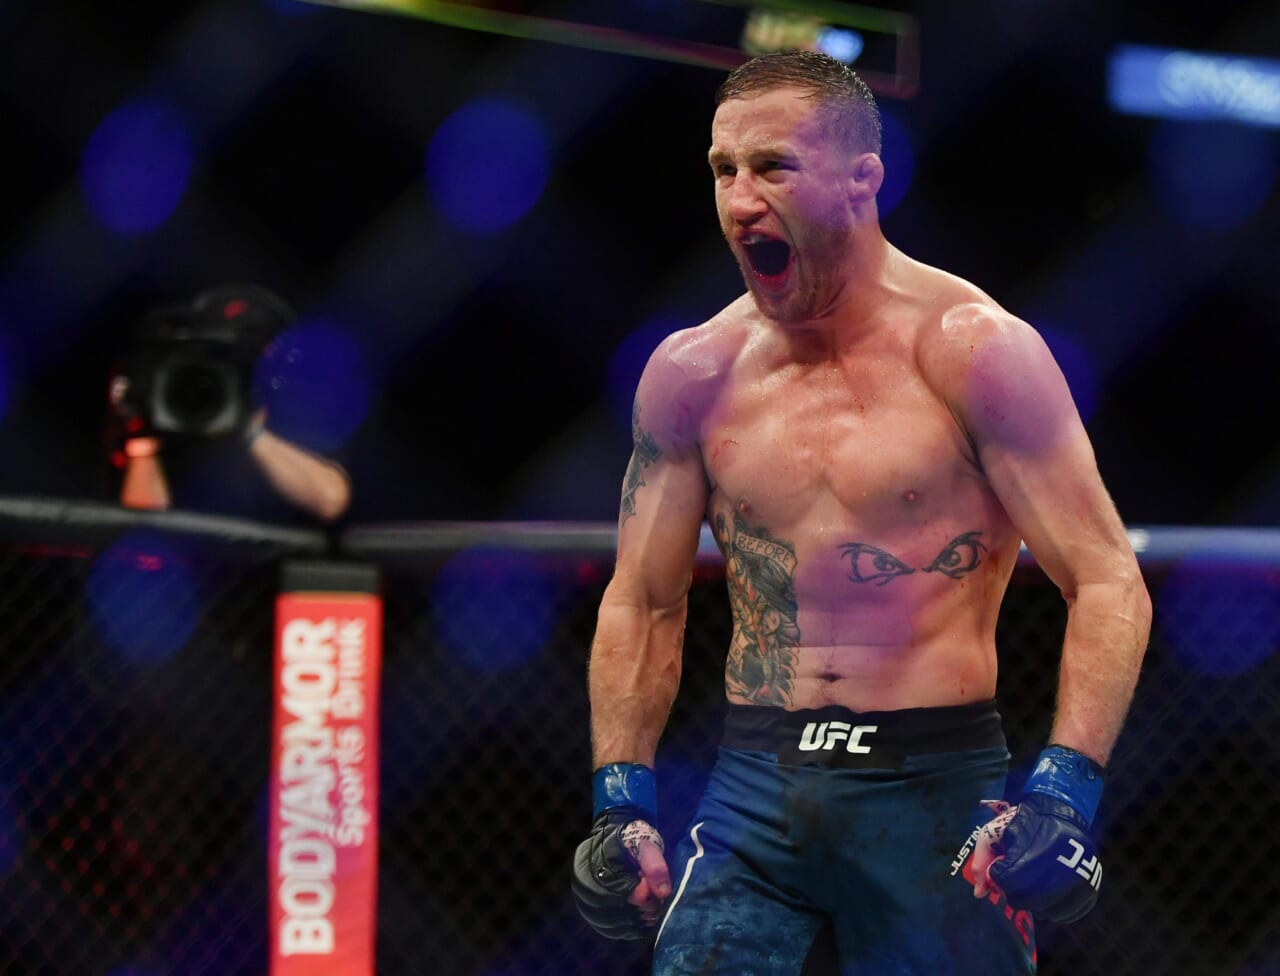 UFC: Justin Gaethje says he needs a win before another title shot